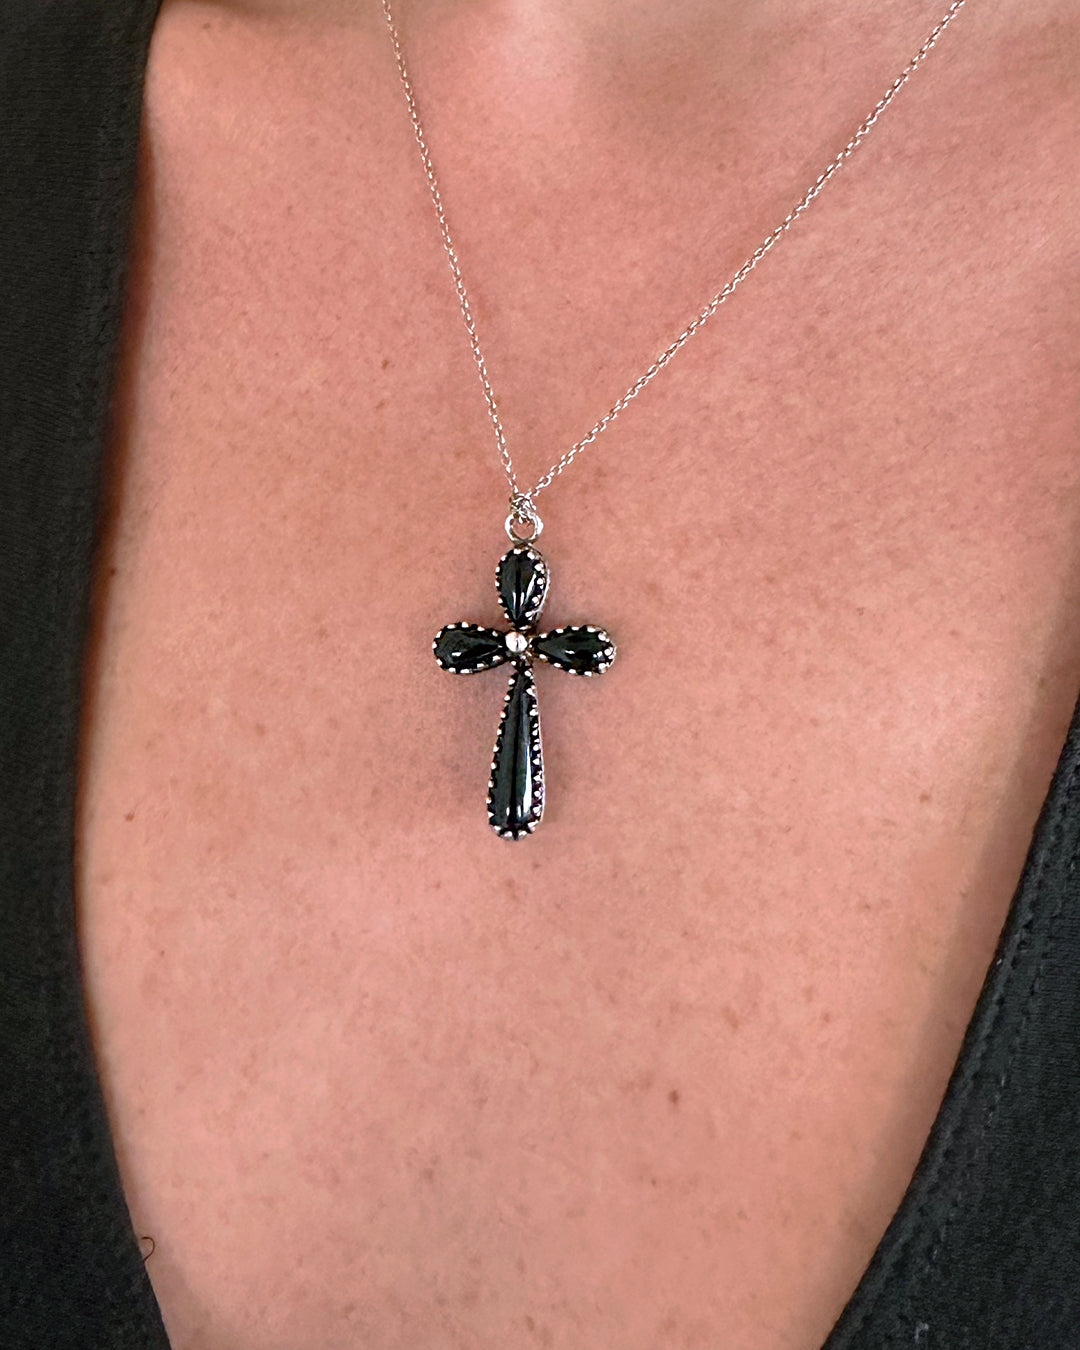 Forever Blessed And Protected Religious Cross Pendant Necklace With 18K  Gold Ion-Plated Accents Inlaid With Black Onyx And Hand Set With 5 Diamonds